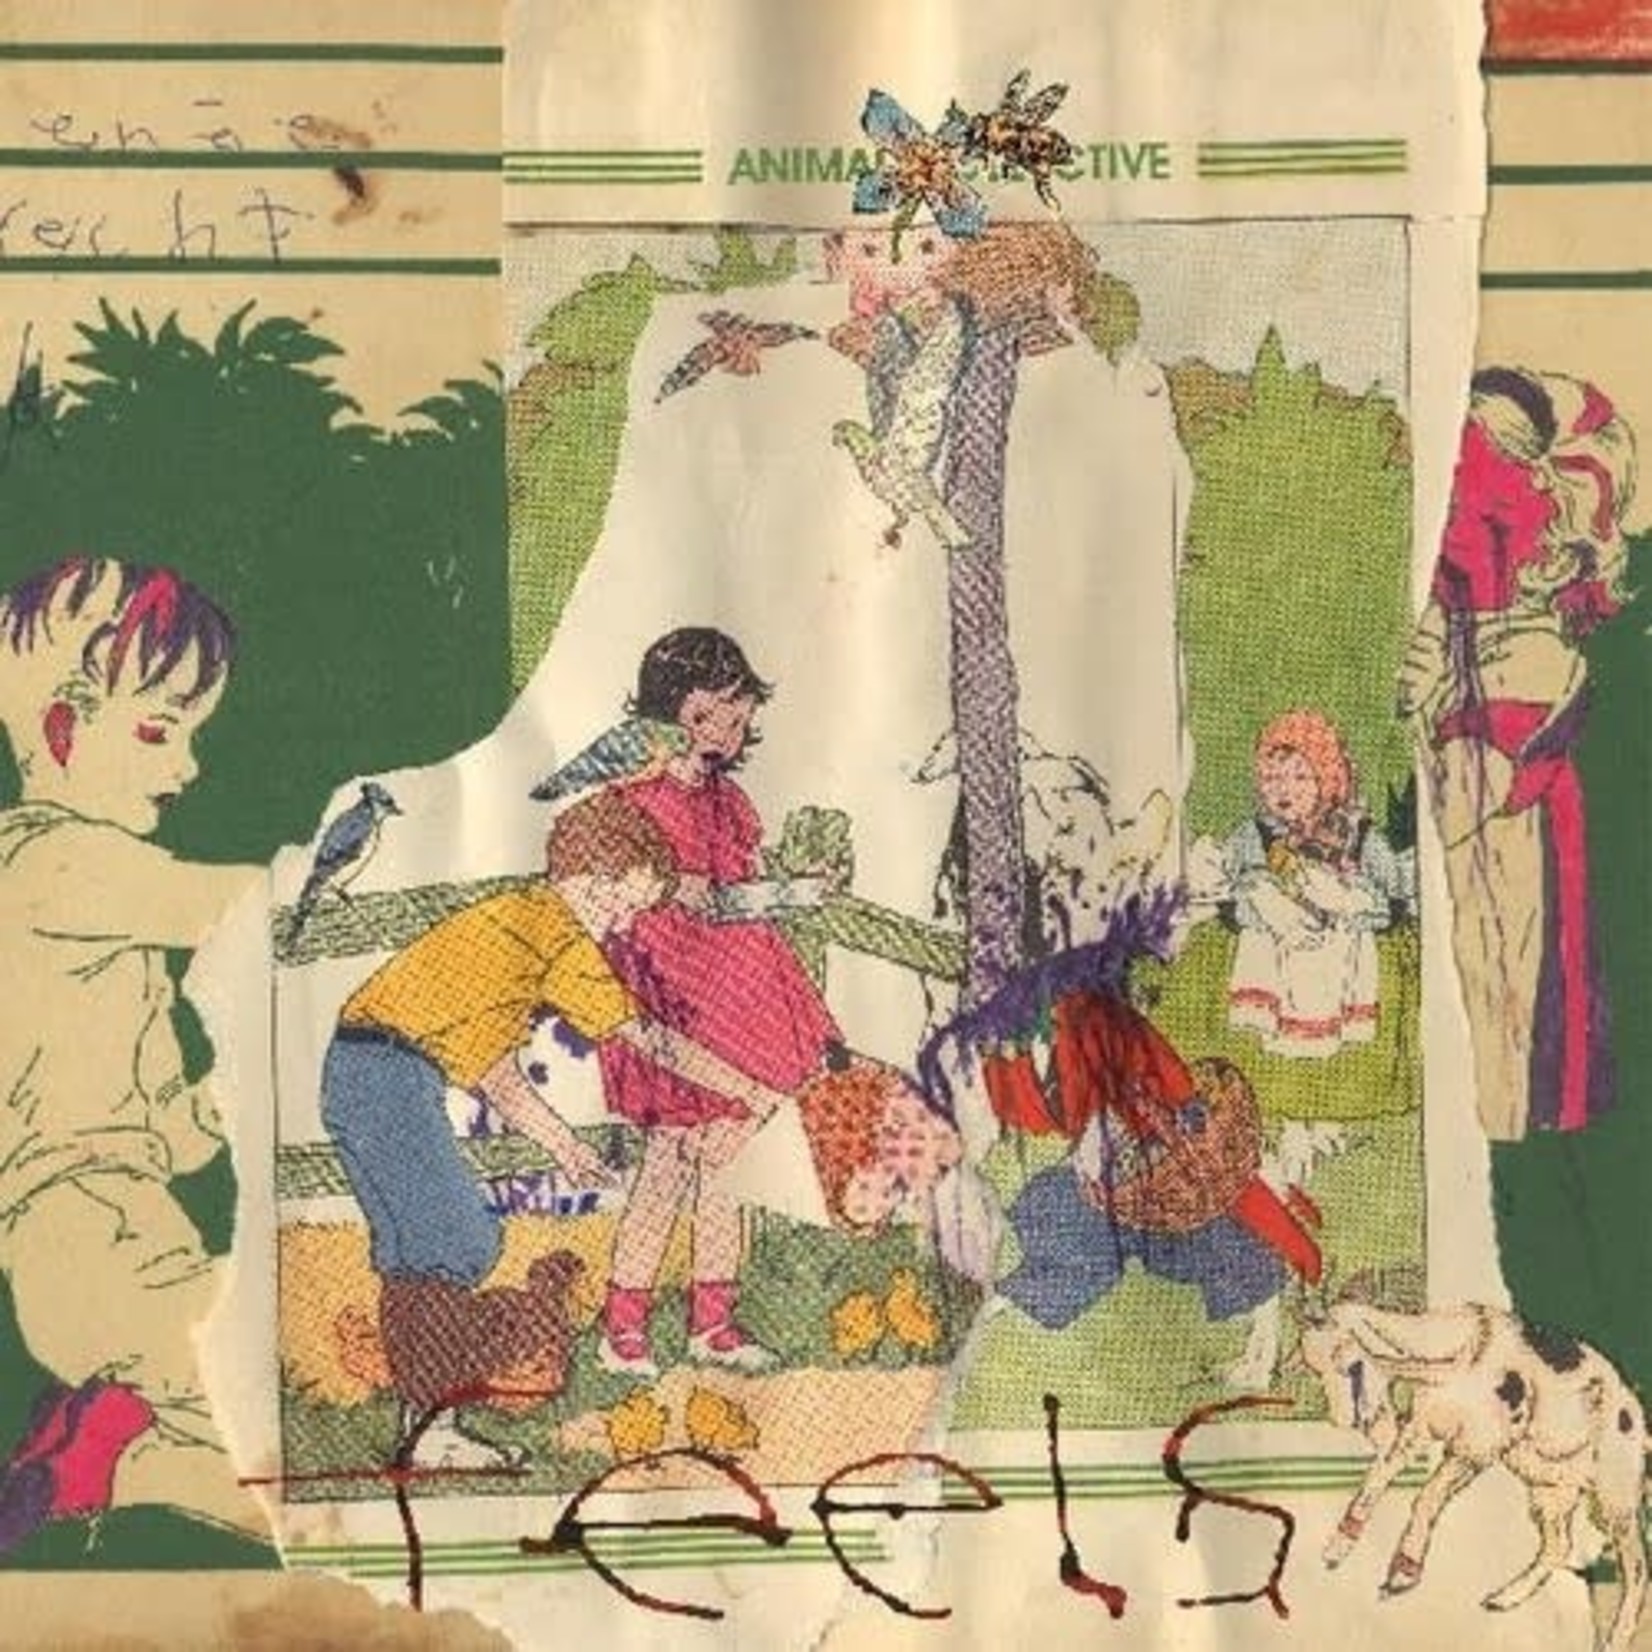 Domino Animal Collective - Feels (2LP) [2021]